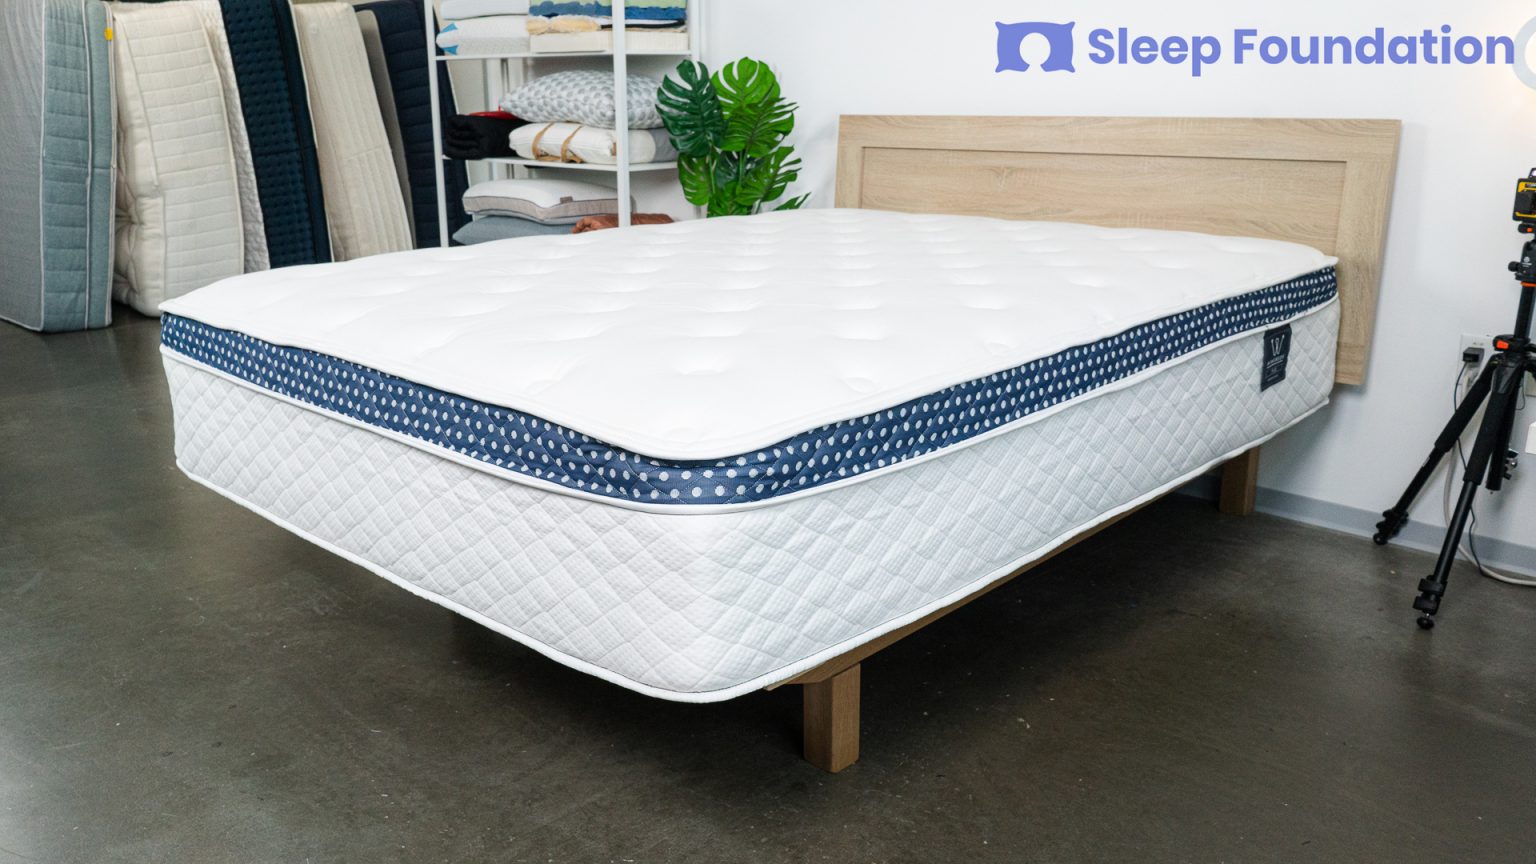 A picture of the Softer WinkBed Mattress in Sleep Foundation's test lab.